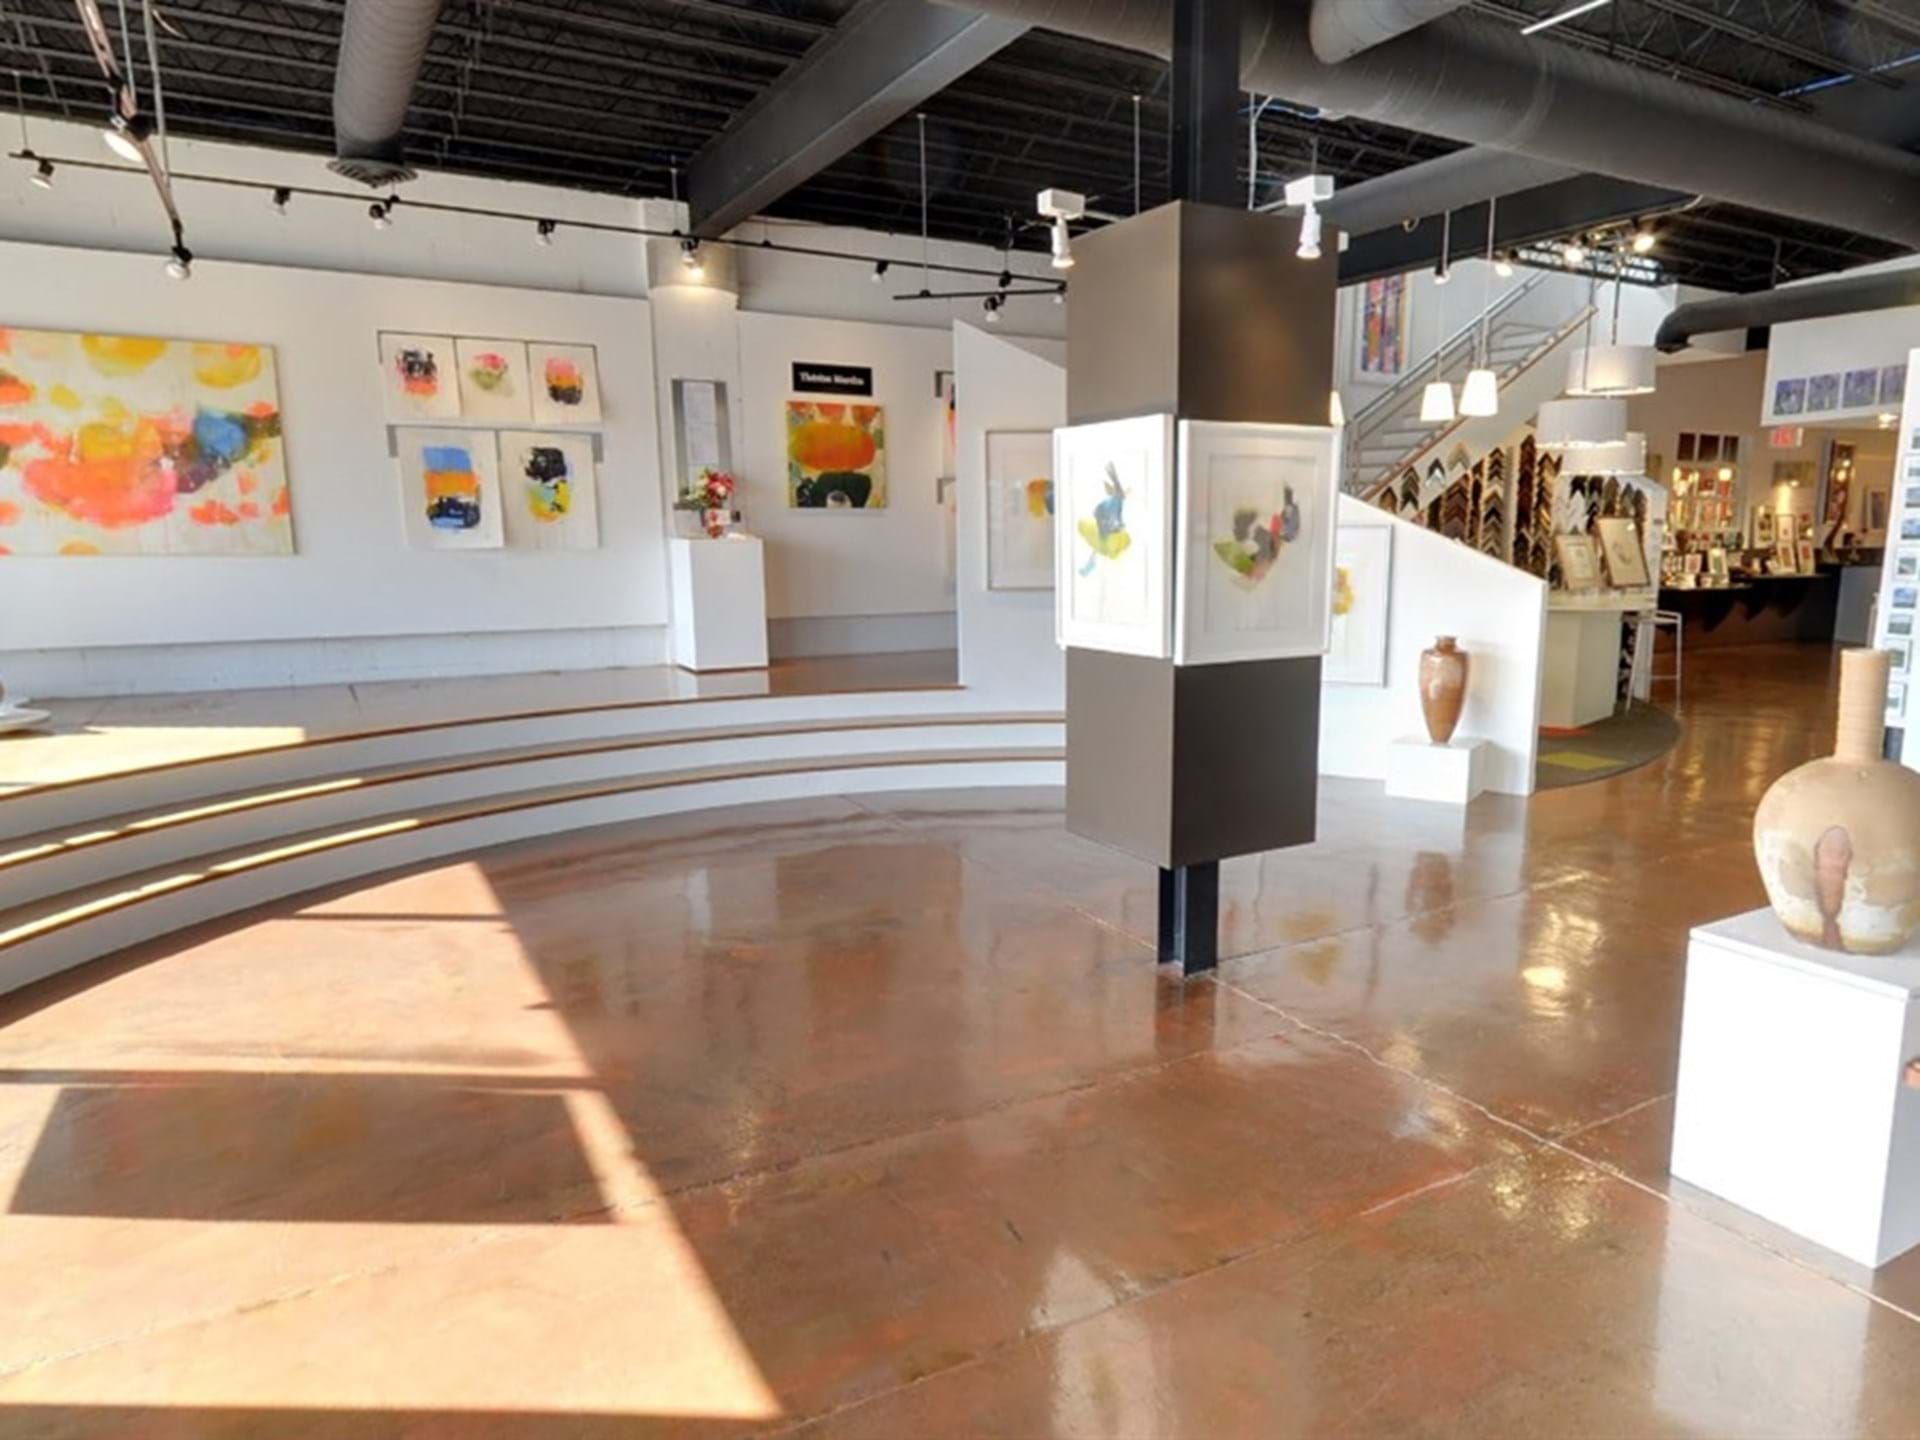 Gilded Pear Gallery exhibit space